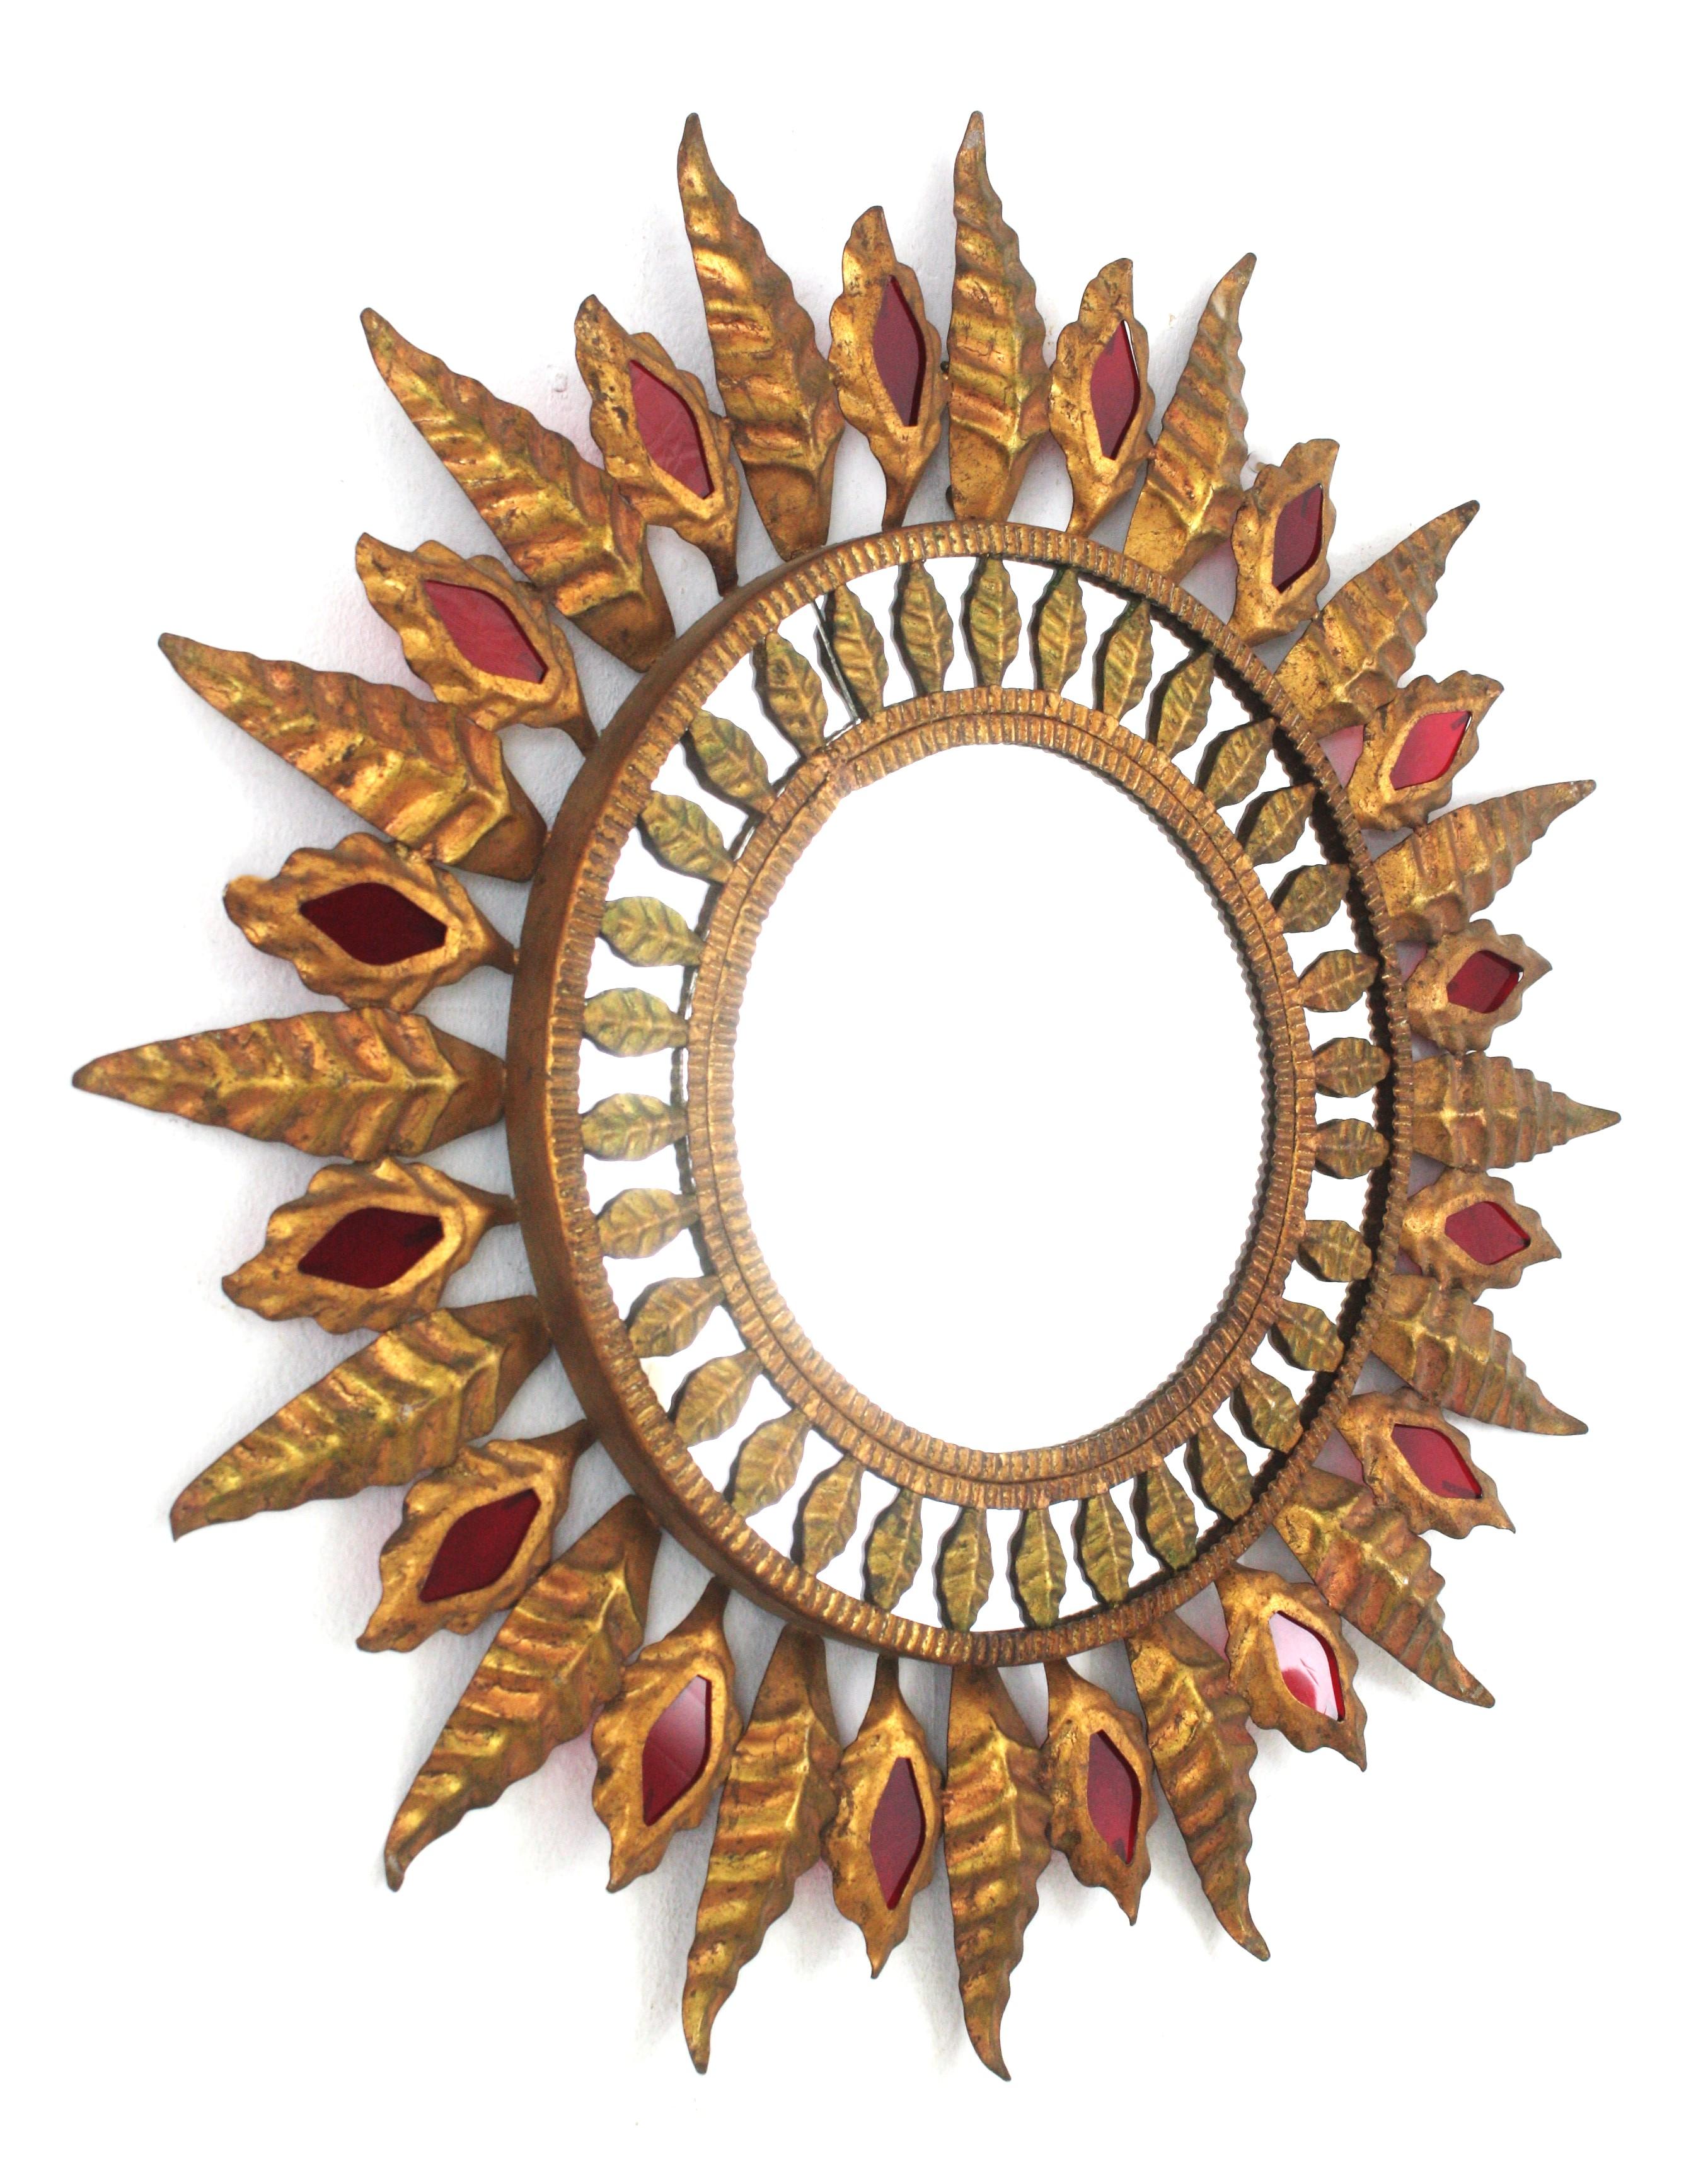 Mid-Century Modern Hollywood Regency Sunburst Mirror in Gilt Metal and Red Glass Detail, 1950s For Sale